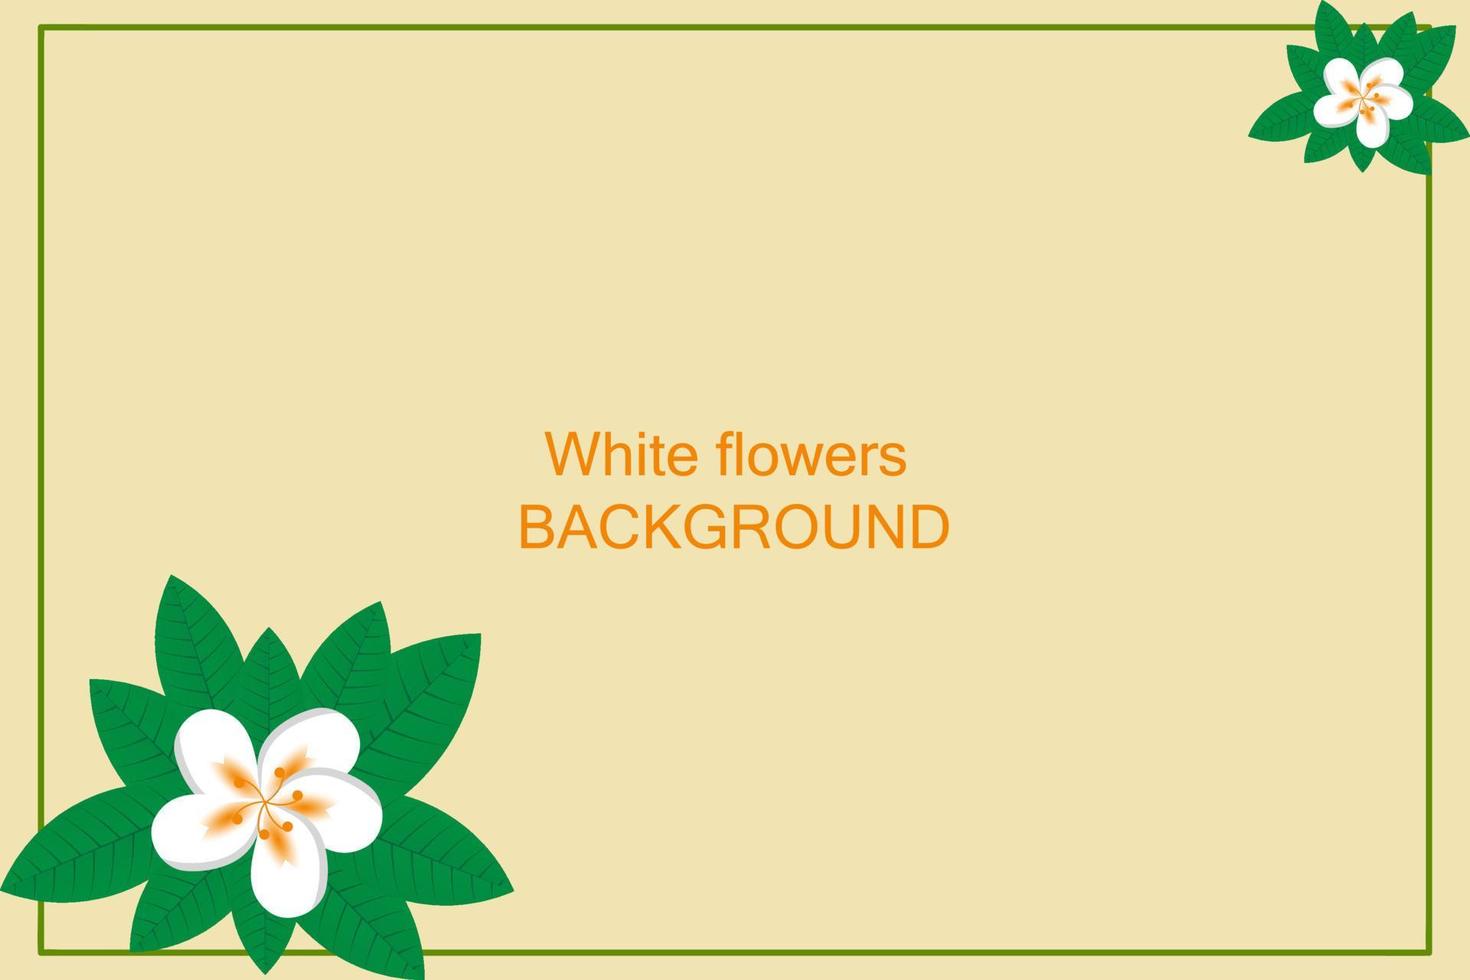 White flowers among green leaves, Vector illustration concepts for social media banners and post, business presentation and report templates, marketing material, print design.